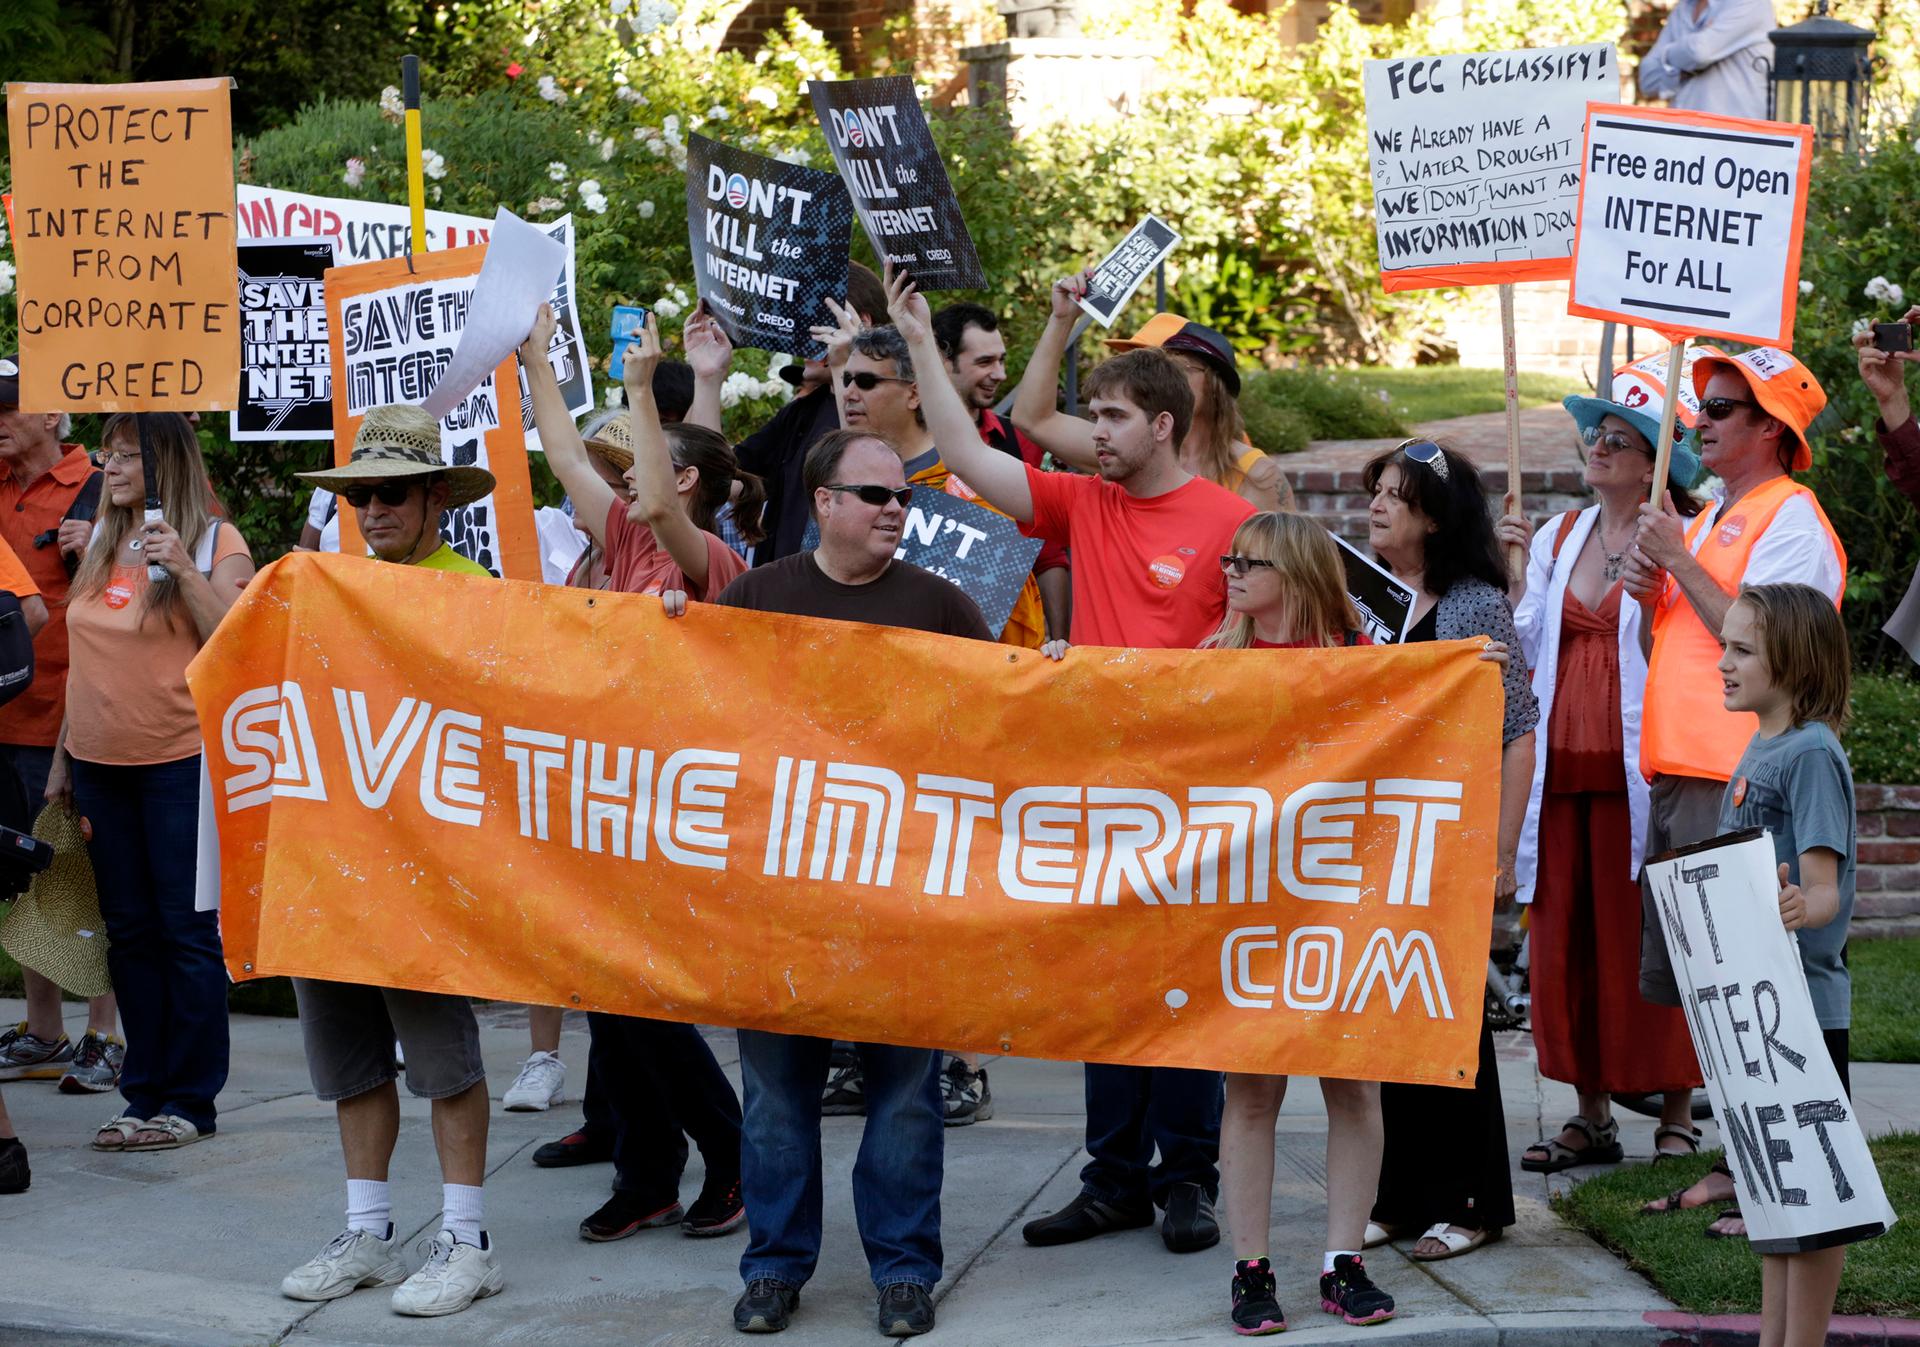 Pro-net neutrality Internet activists rally in the Los Angeles neighborhood where President Barack Obama attended a fundraiser on July 23, 2014.